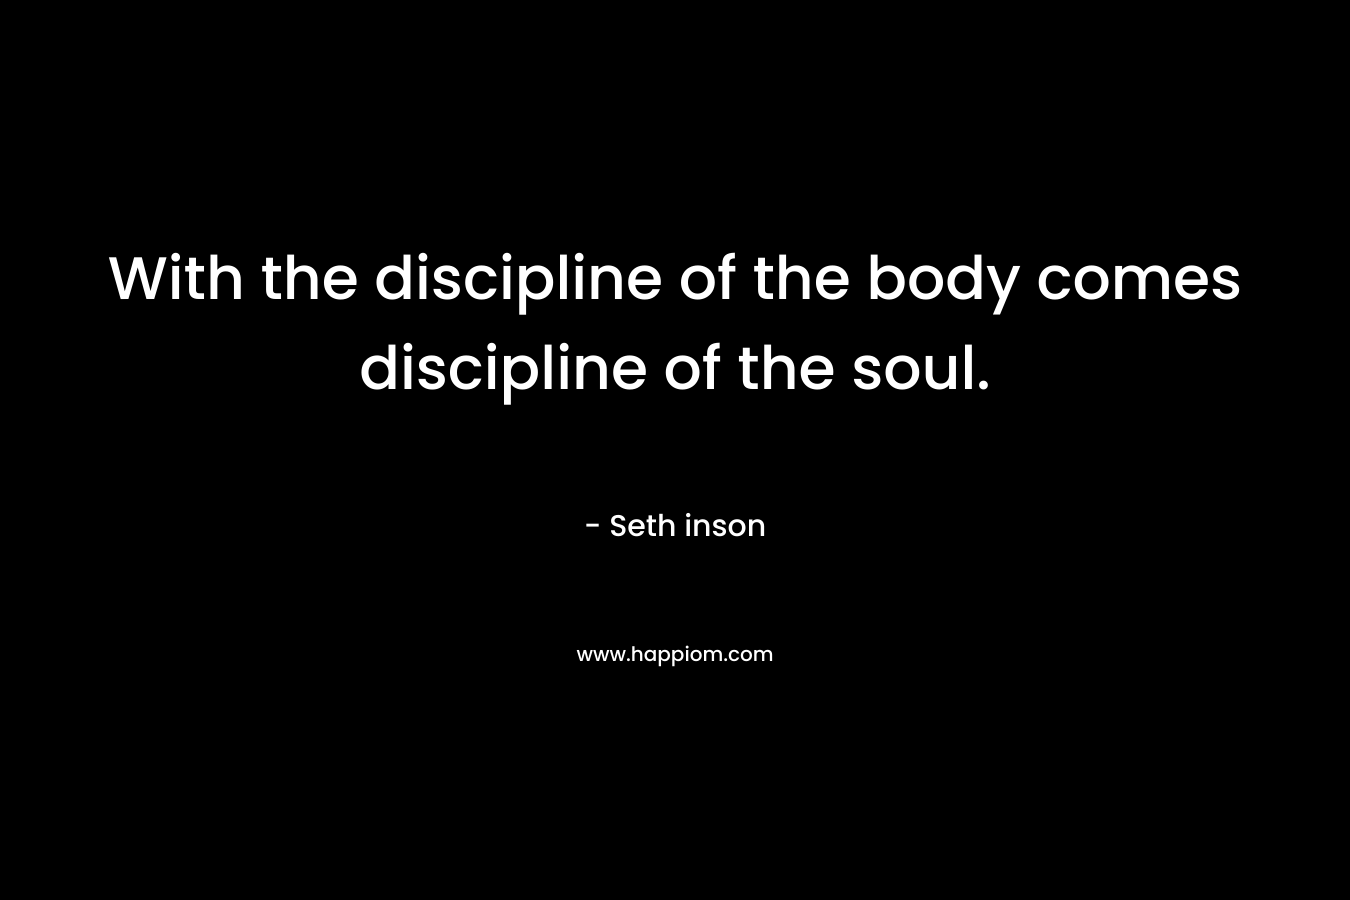 With the discipline of the body comes discipline of the soul.